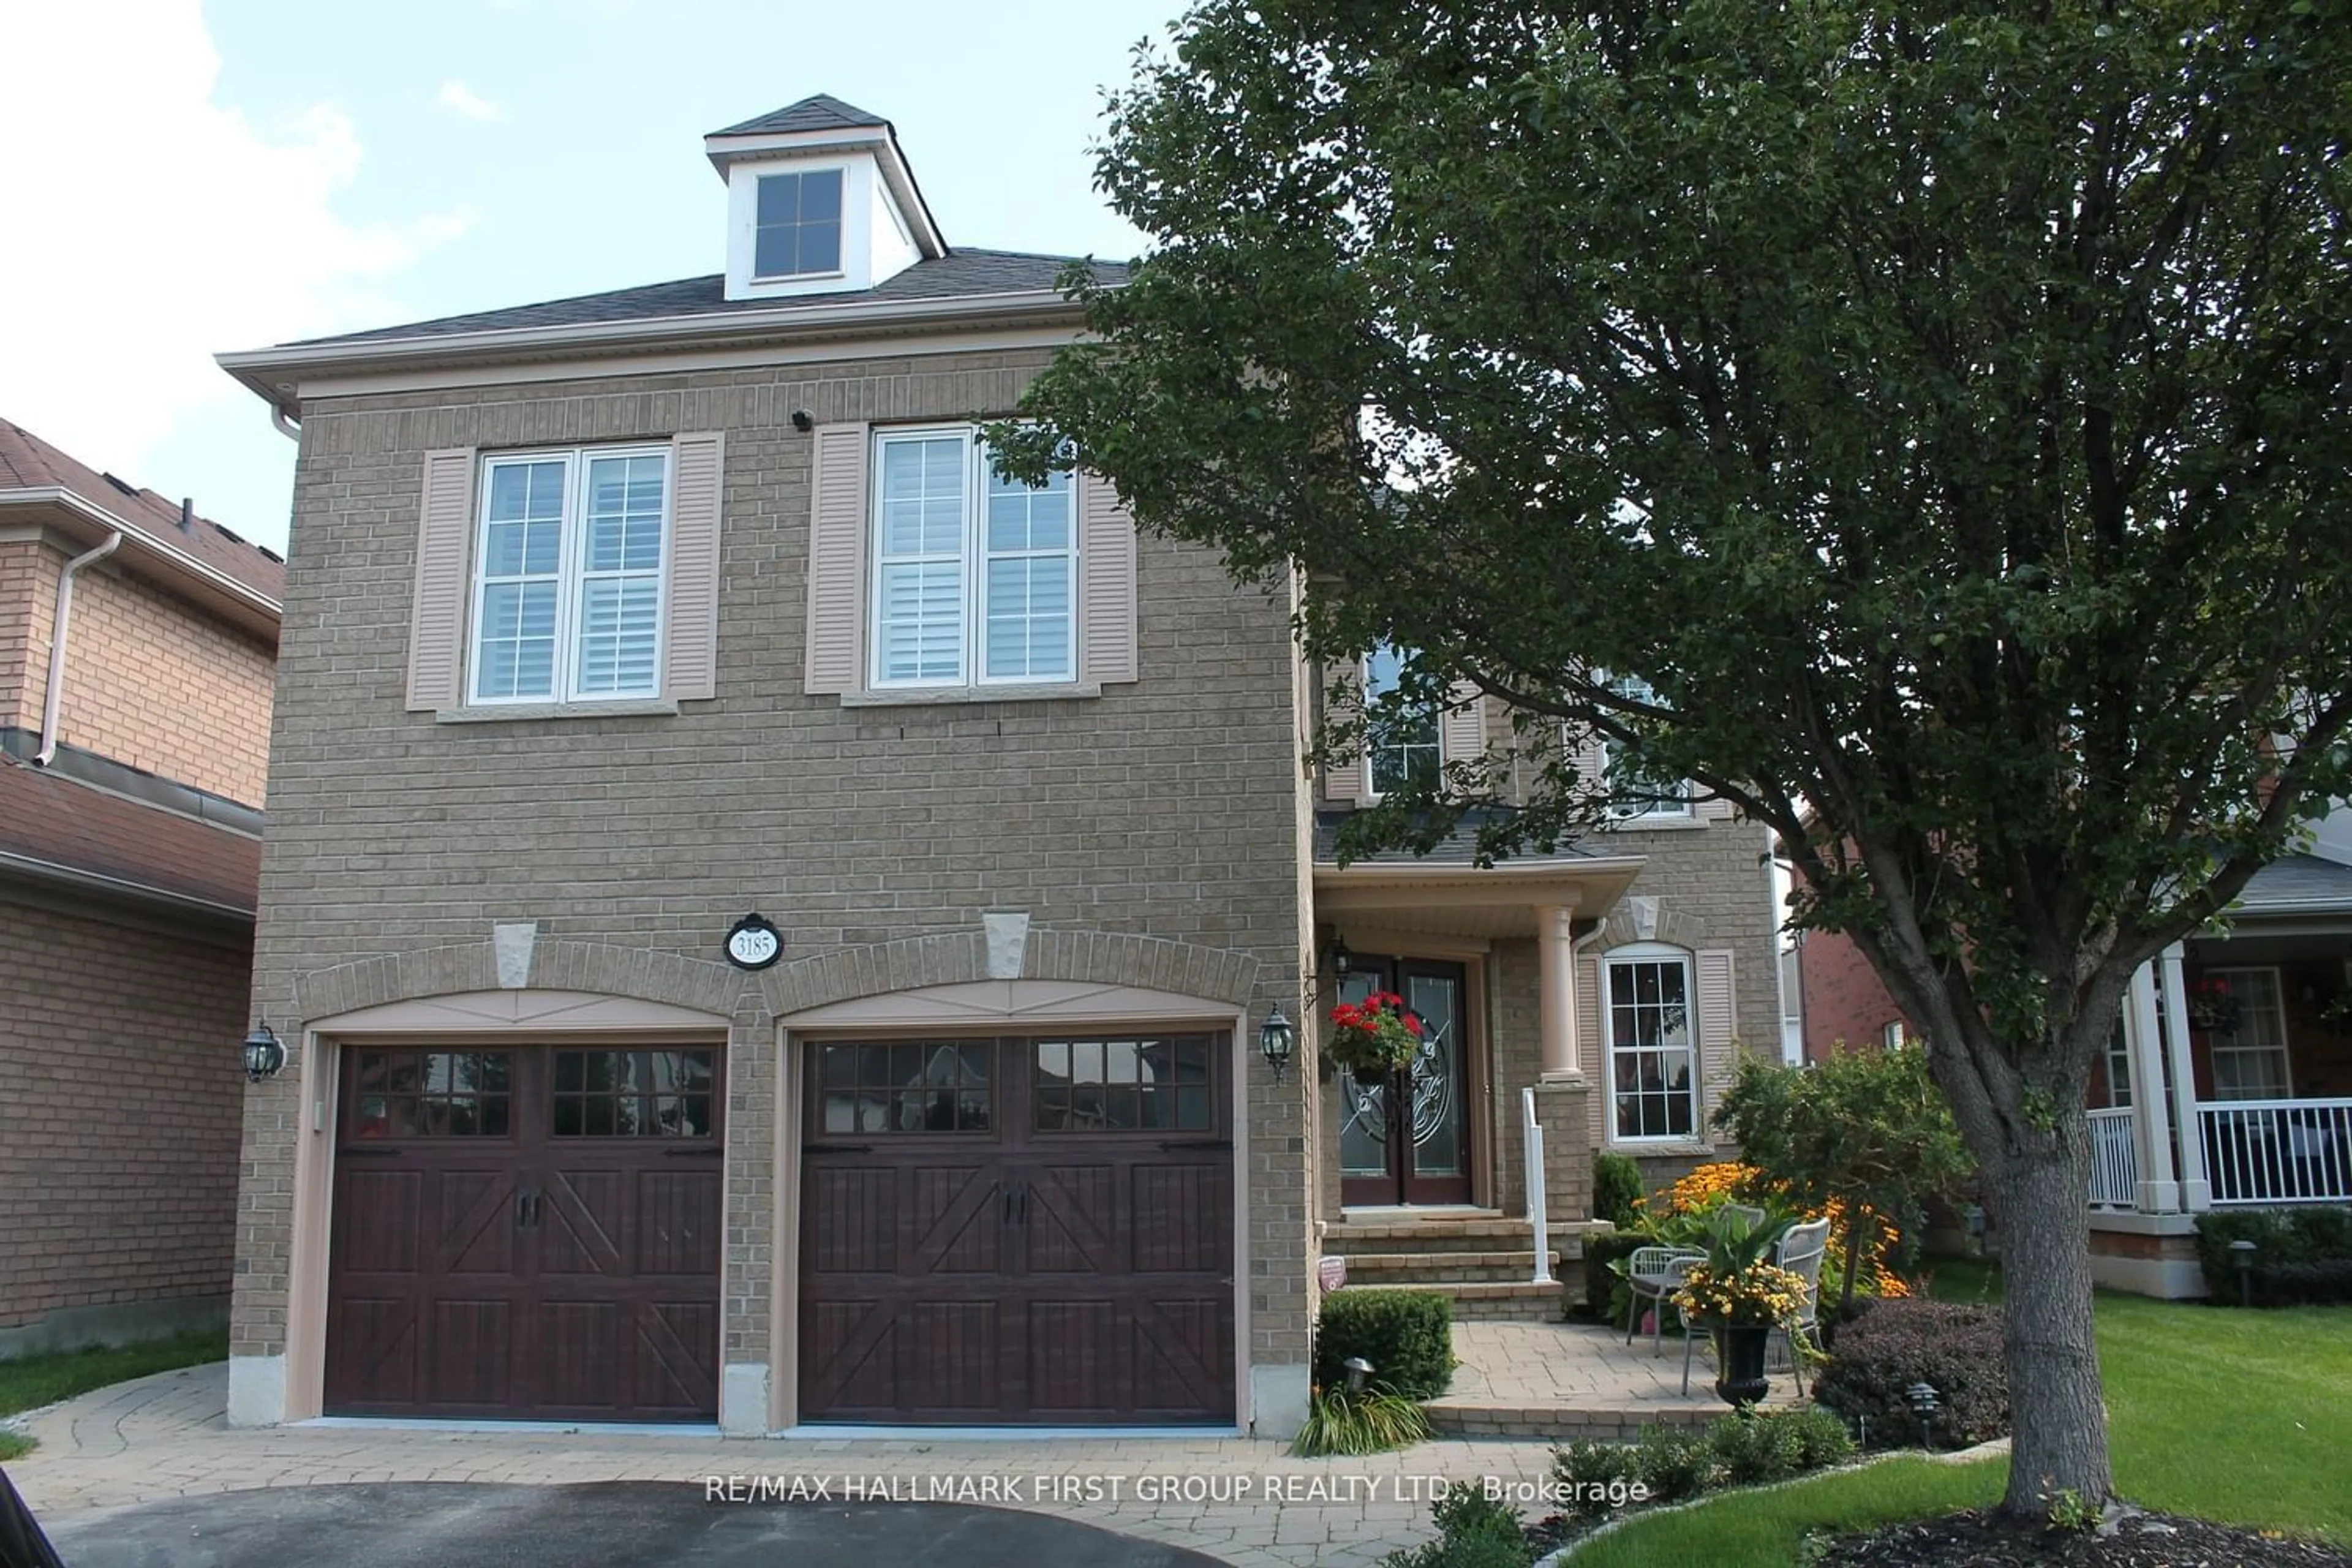 Home with brick exterior material for 3185 Country Lane, Whitby Ontario L1P 0A4